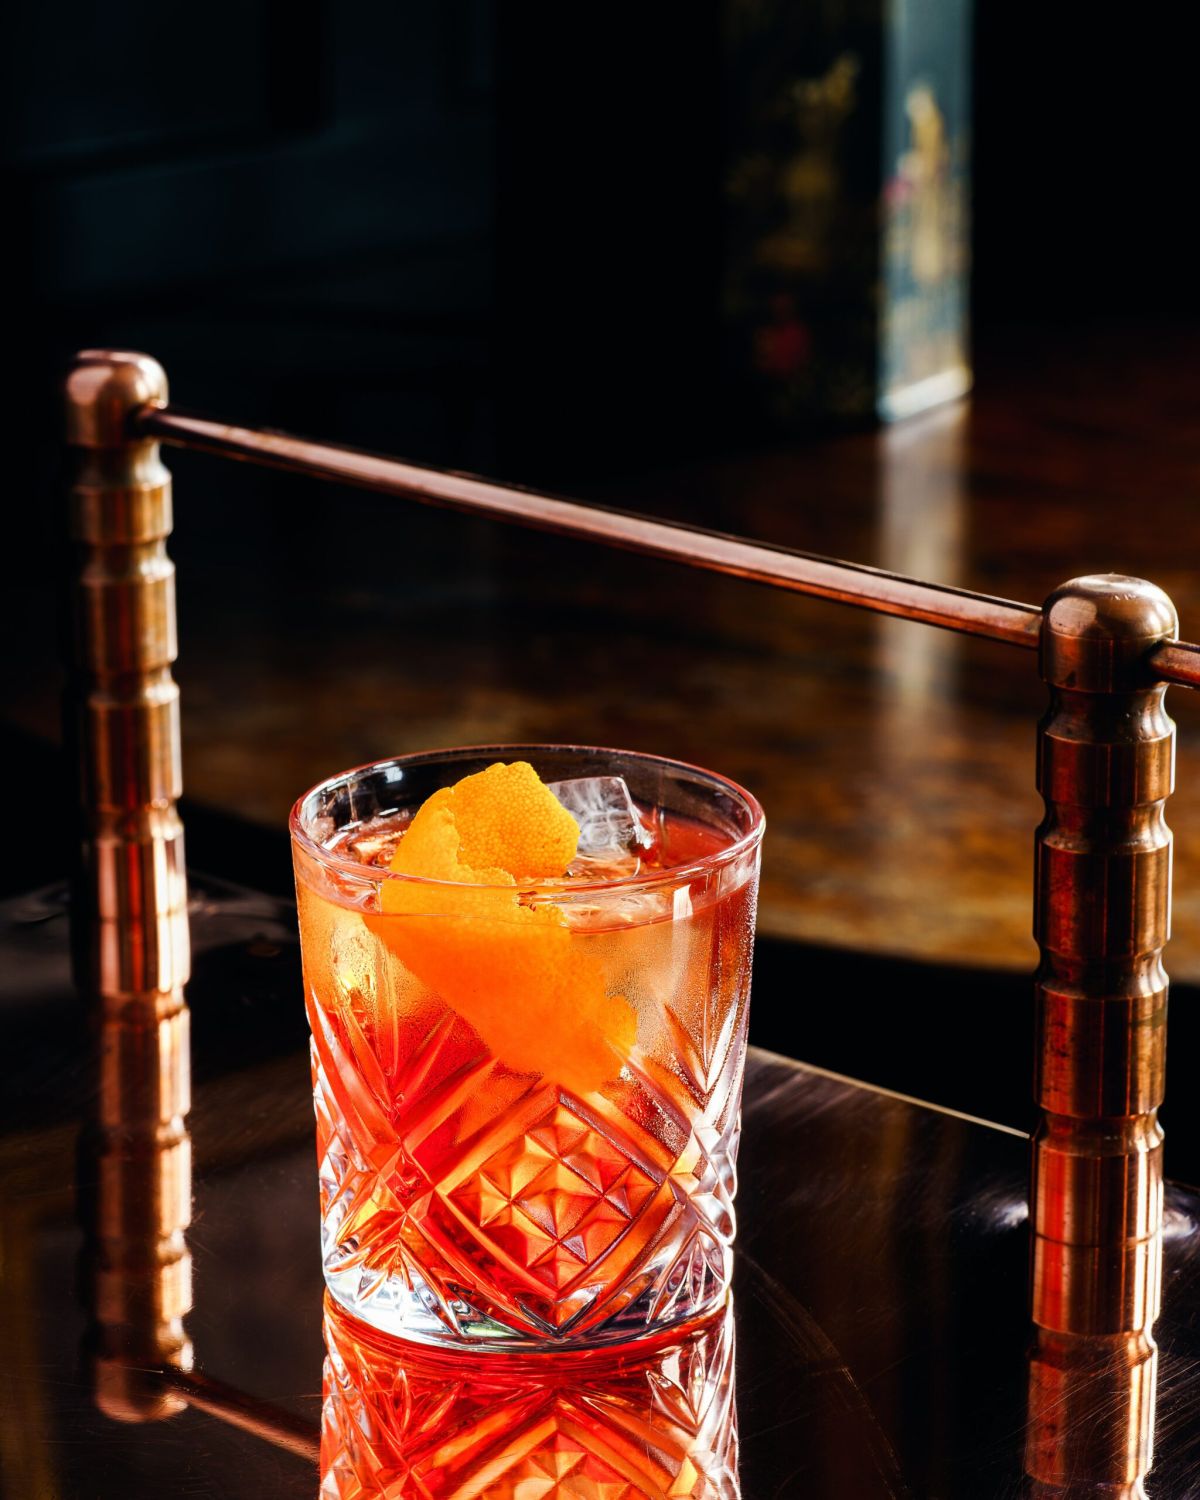 The Negroni Sbagliato: Is it really that stunning?